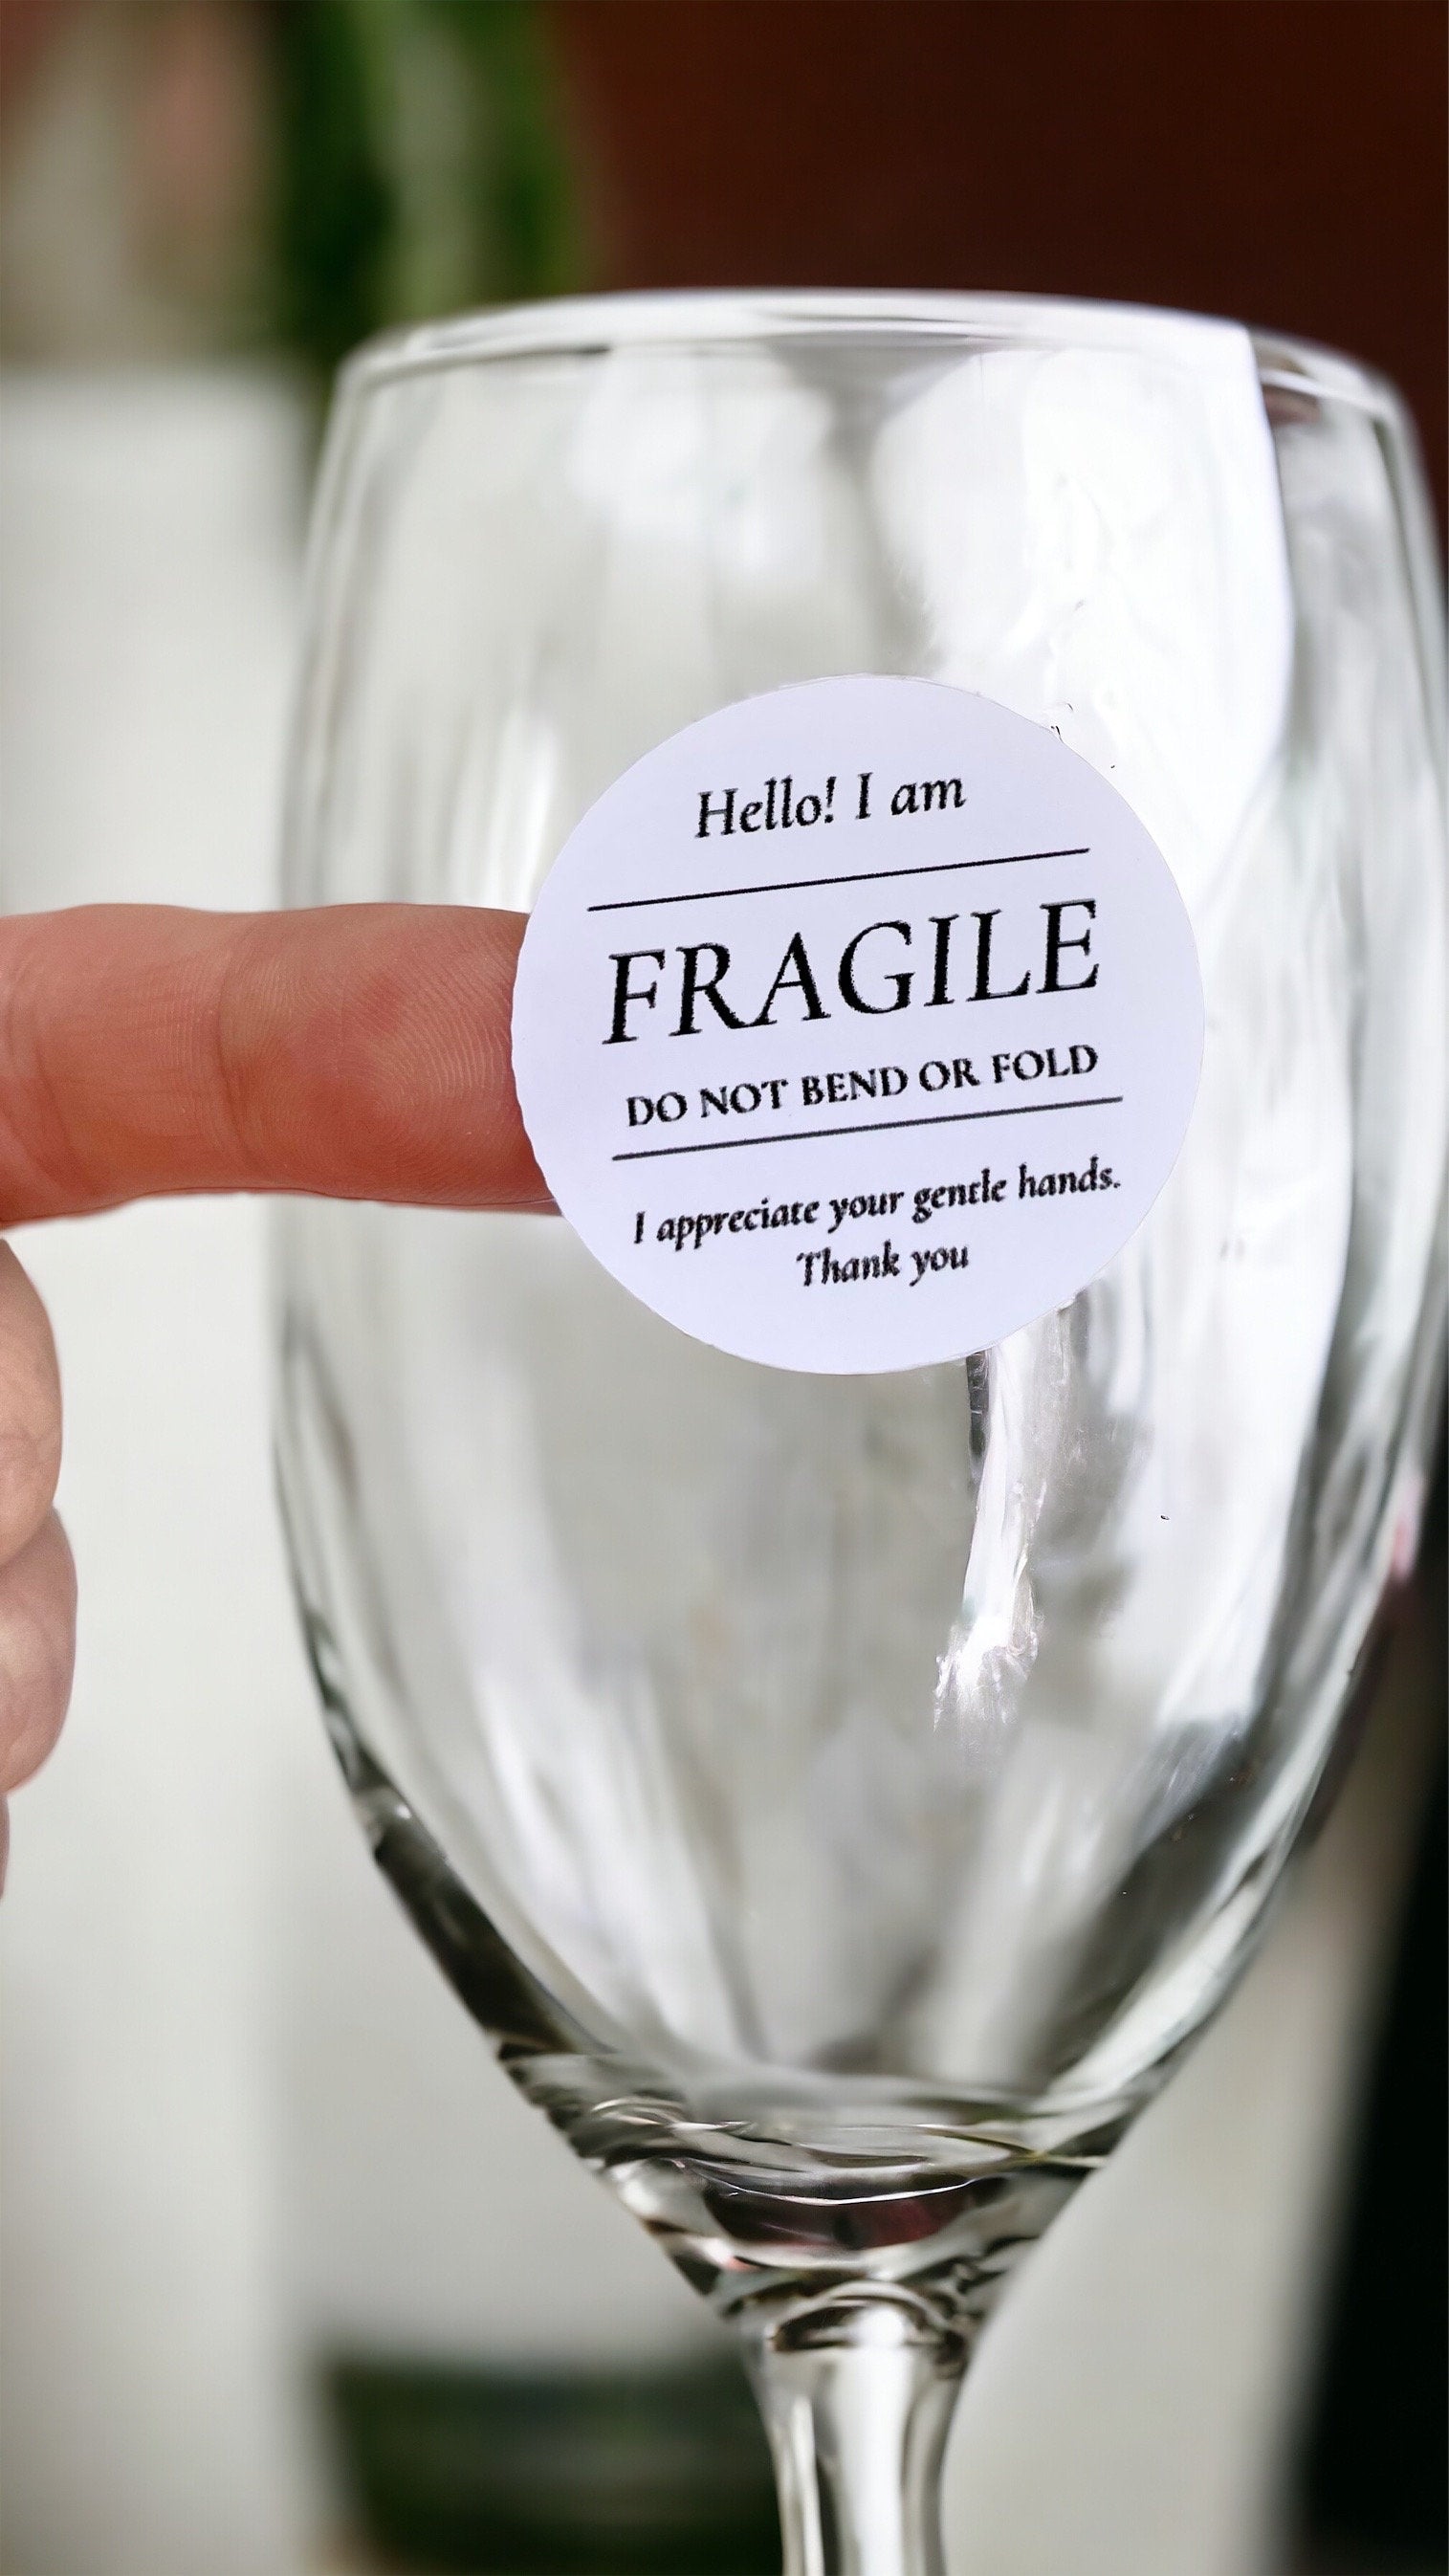 Fragile Sticker | 38mm Labels | Small Business Handle With Care Stickers